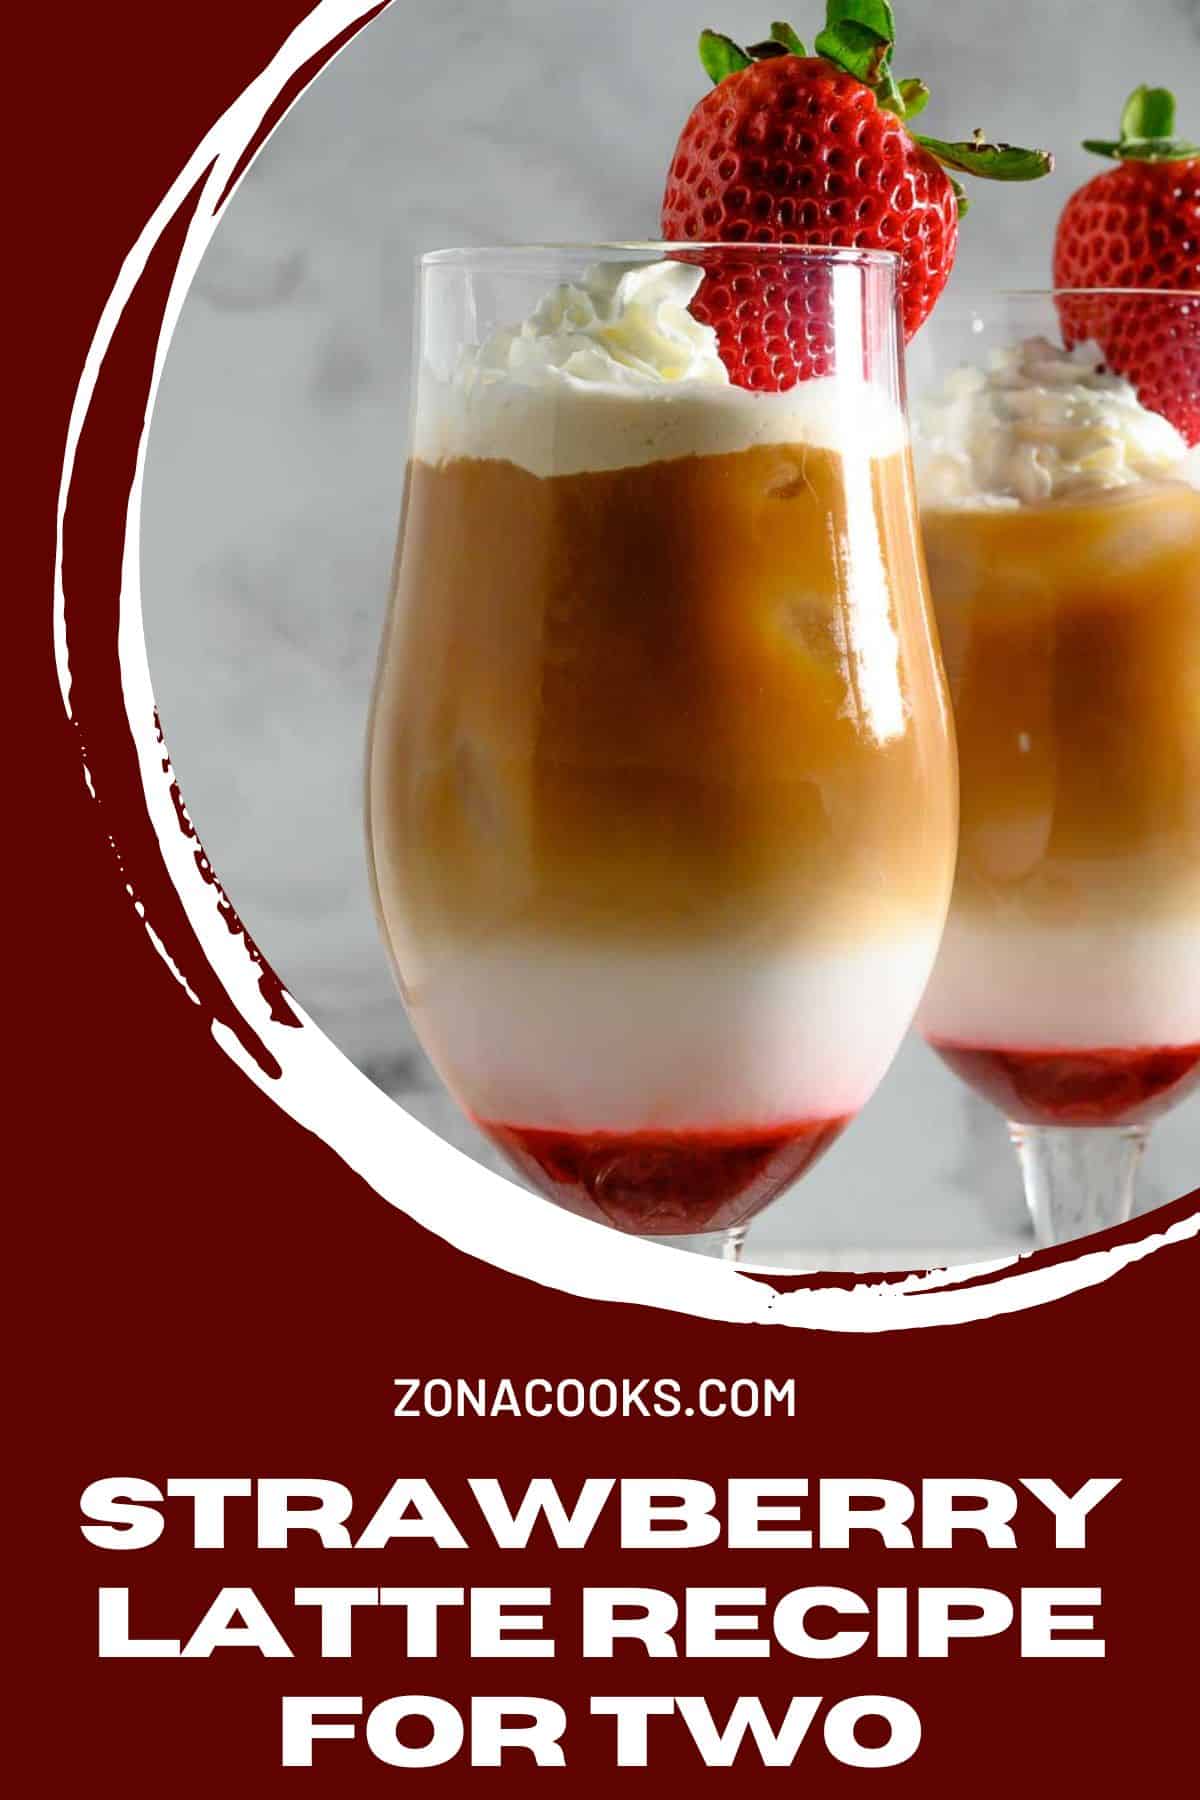 Strawberry Latte Recipe for Two topped with whipped cream and a fresh strawberry.